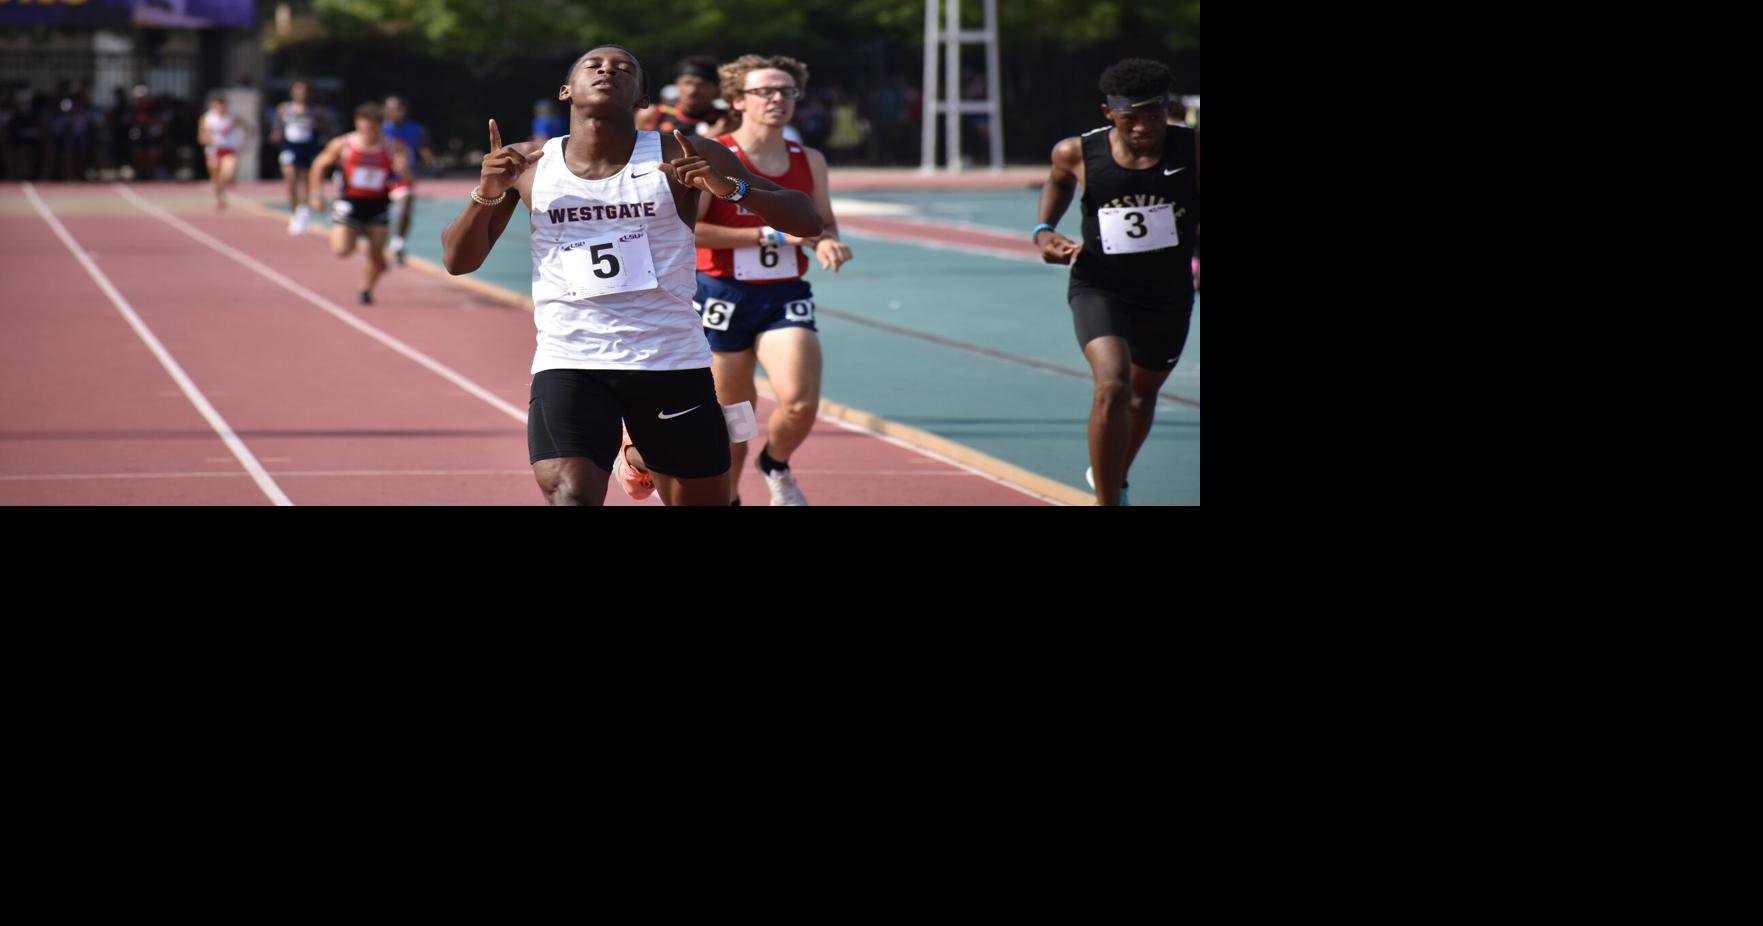 LHSAA Class 3A, 4A, & 5A Track and Field State Meet Results Local